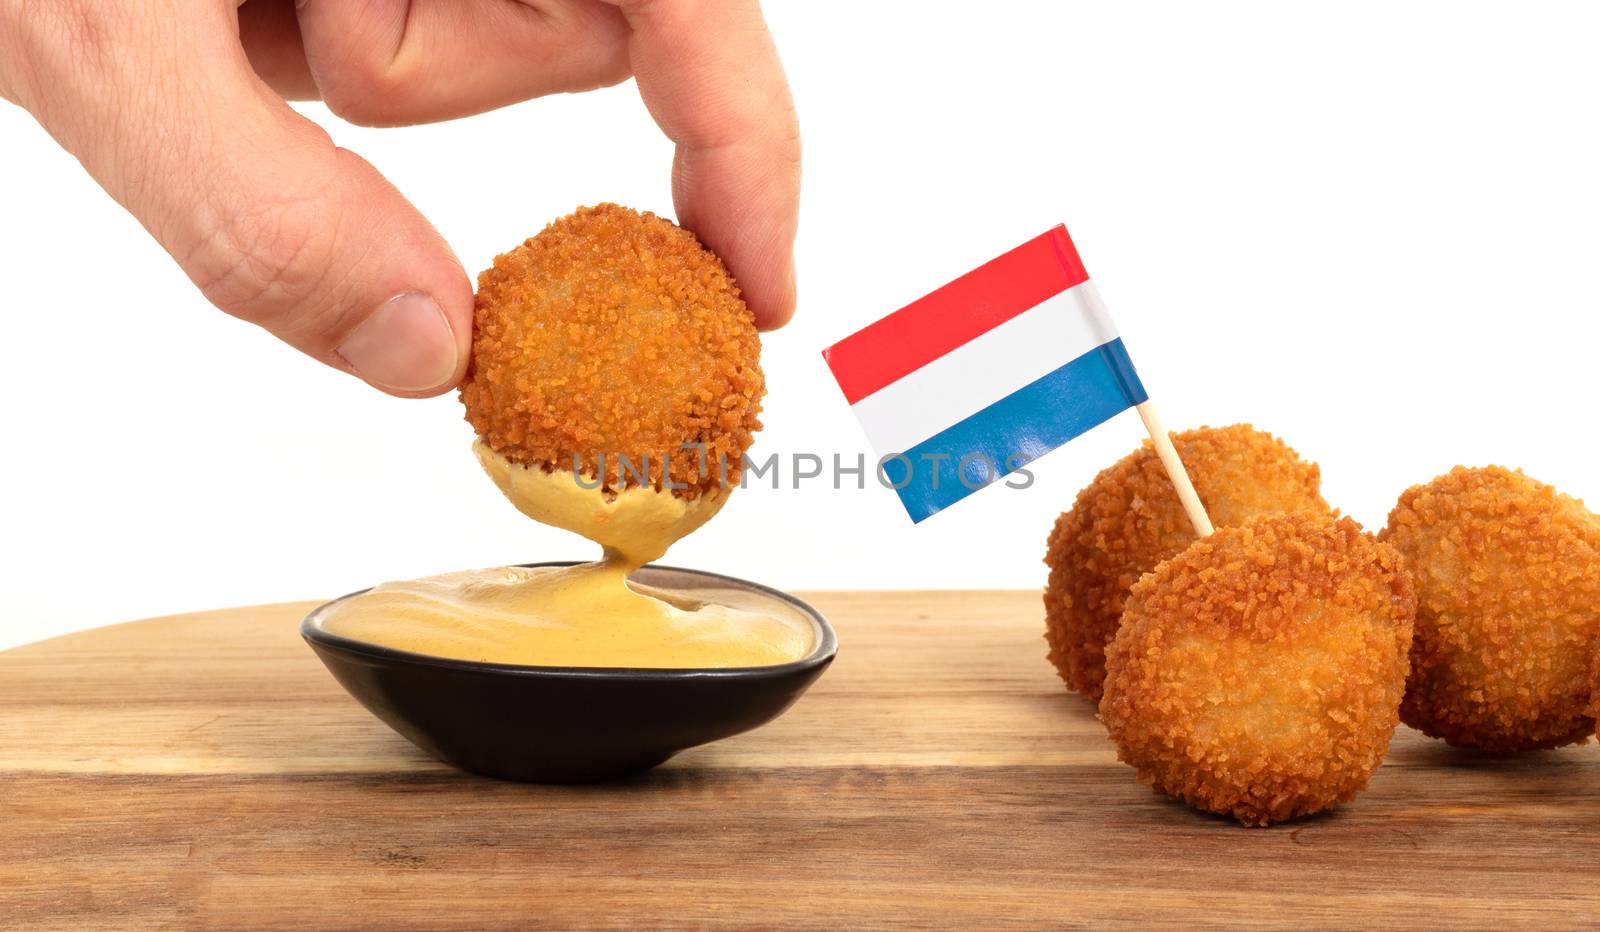 Dutch traditional snack bitterbal in a hand, isolated